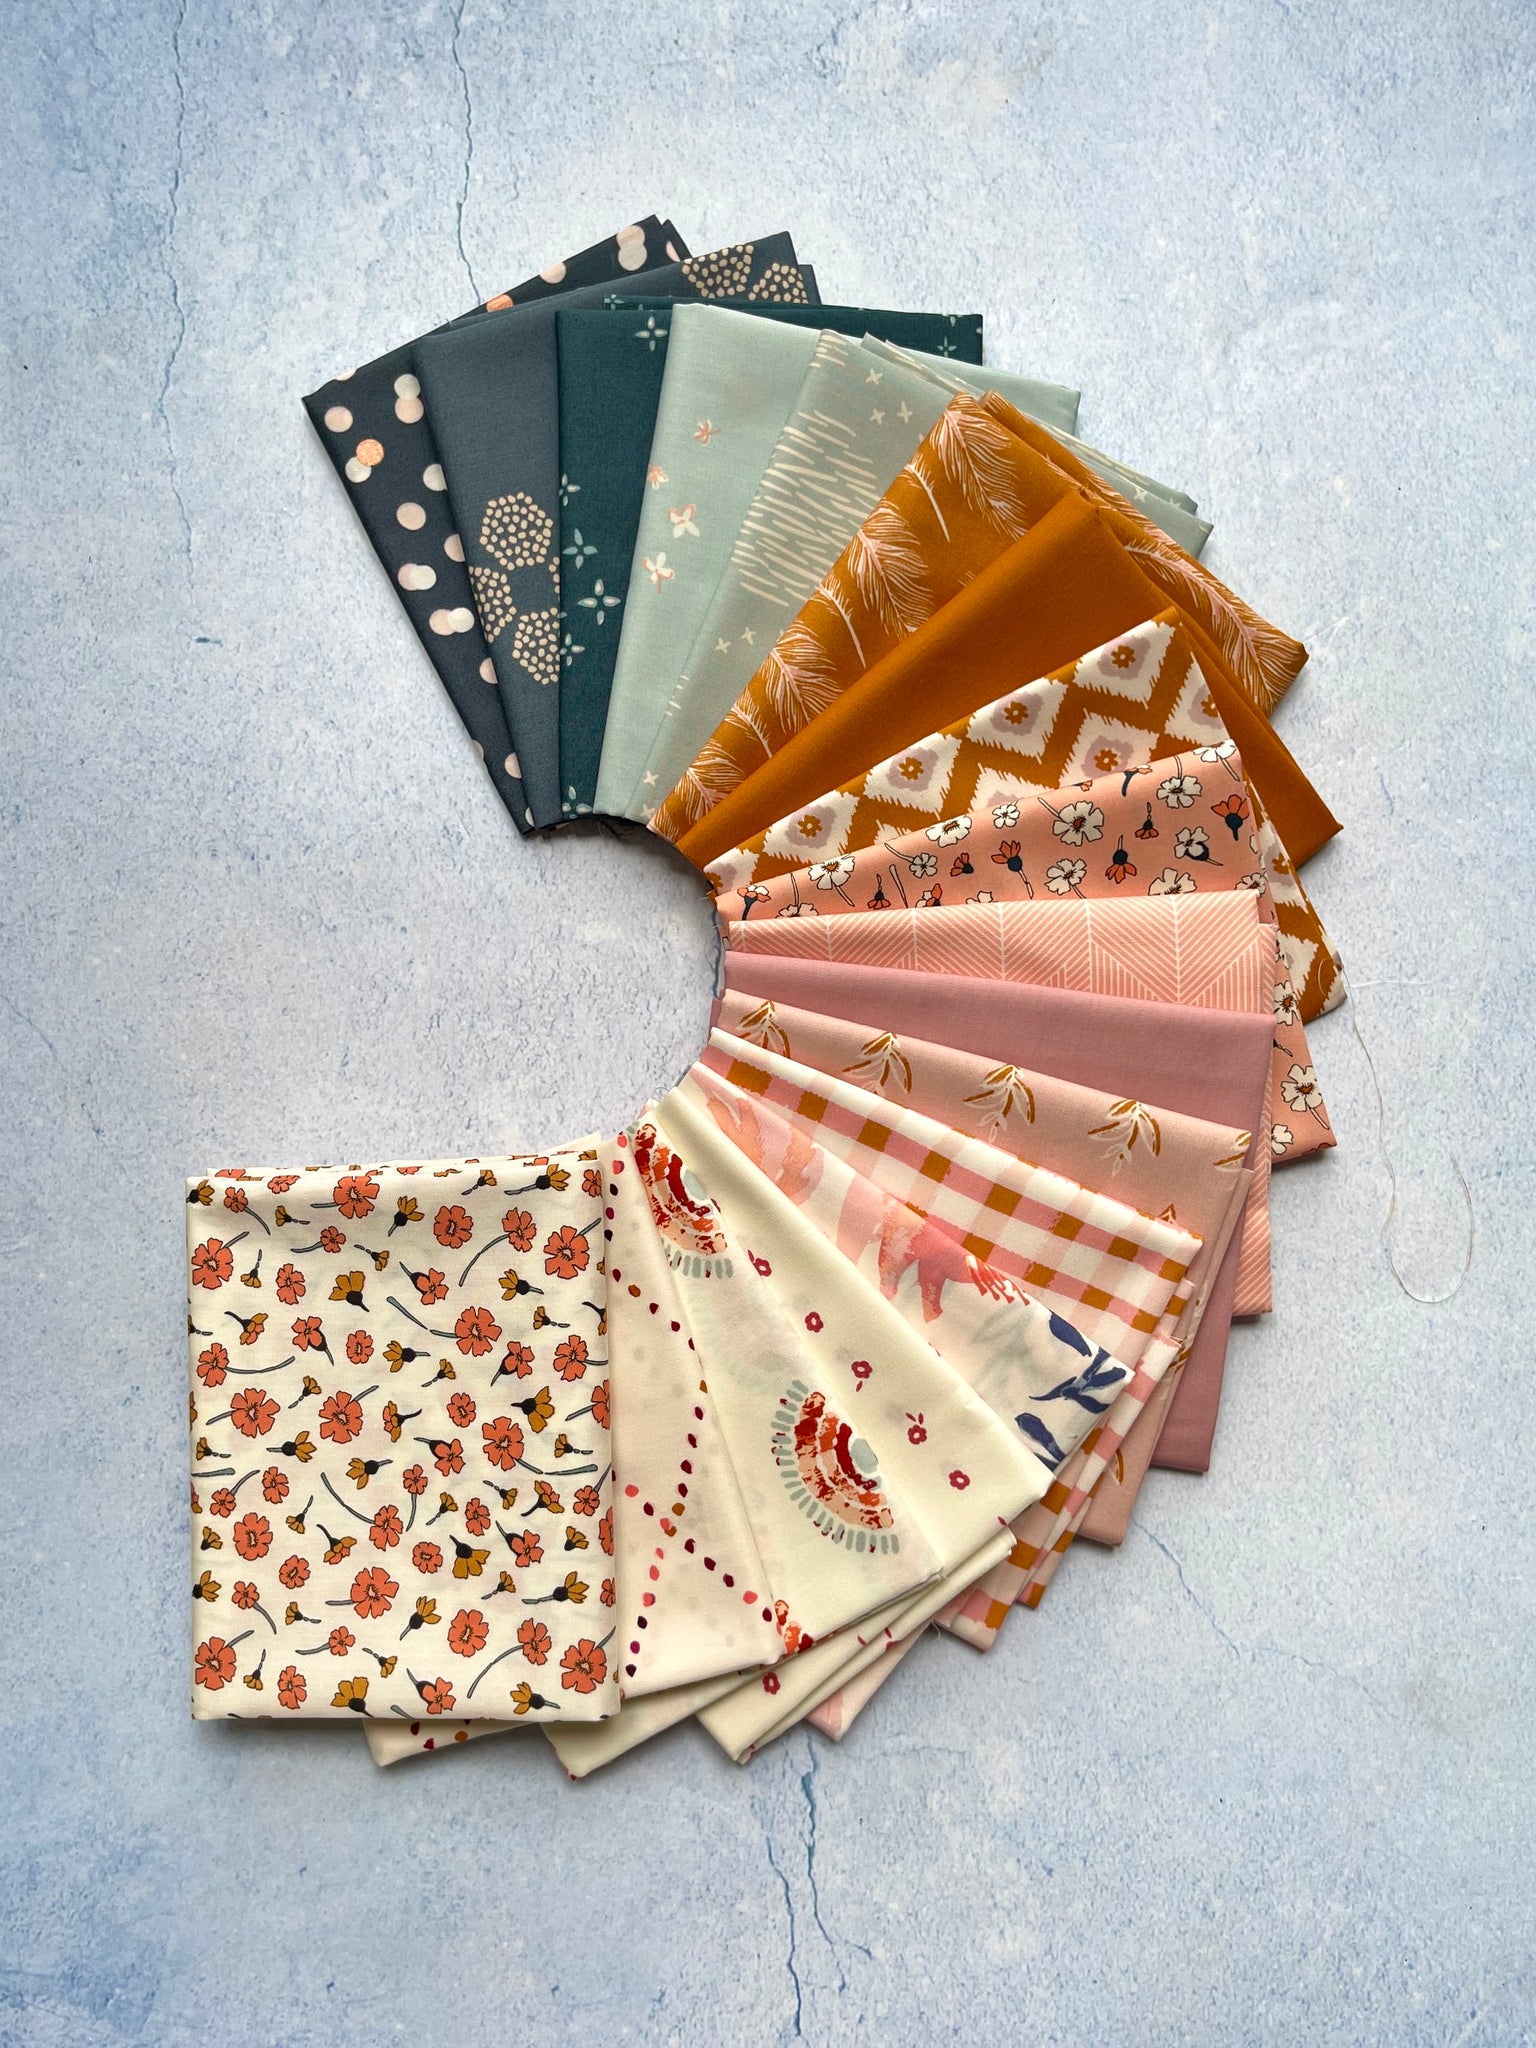 Curated Fat Quarter Bundle- 'Shirley’s Berry cobbler was a huge hit at the pot luck’ (18) Fat Quarters (Art Gallery Fabrics)